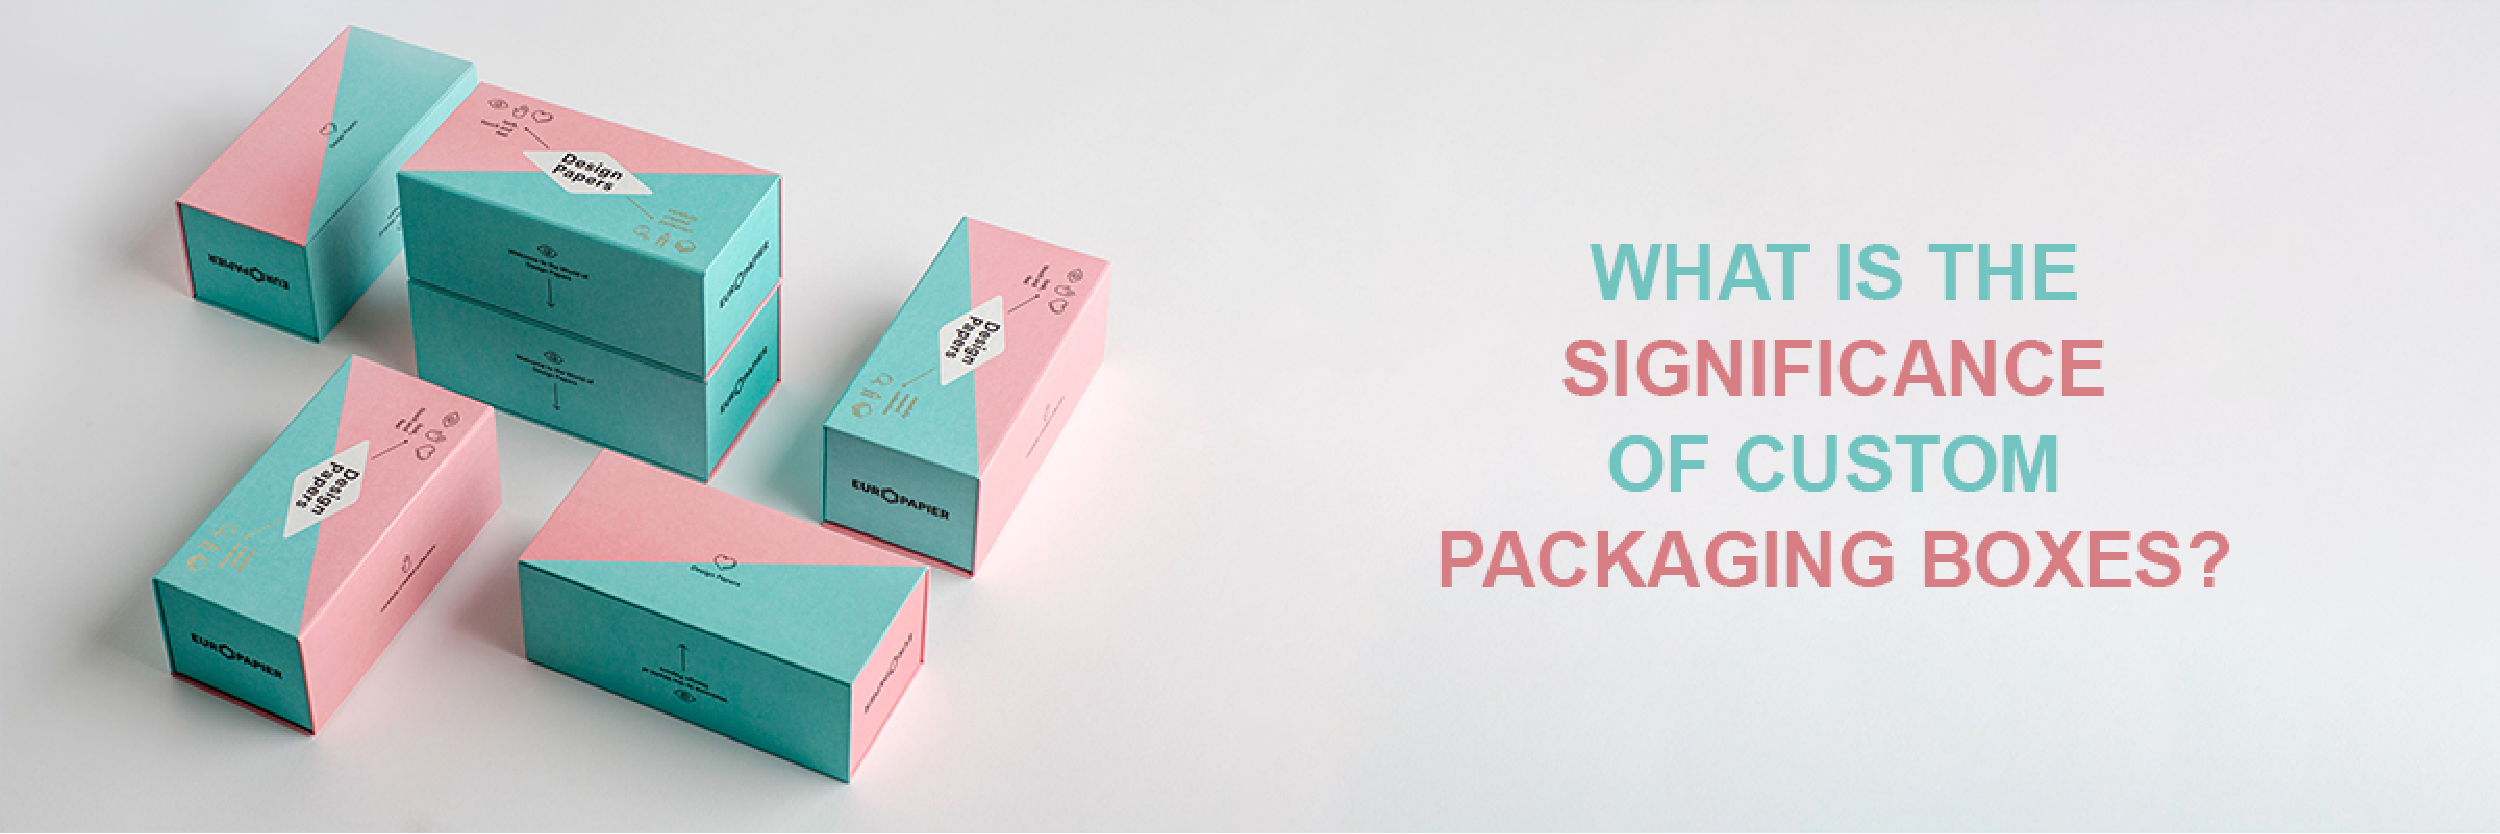 What is the significance of custom packaging boxes?